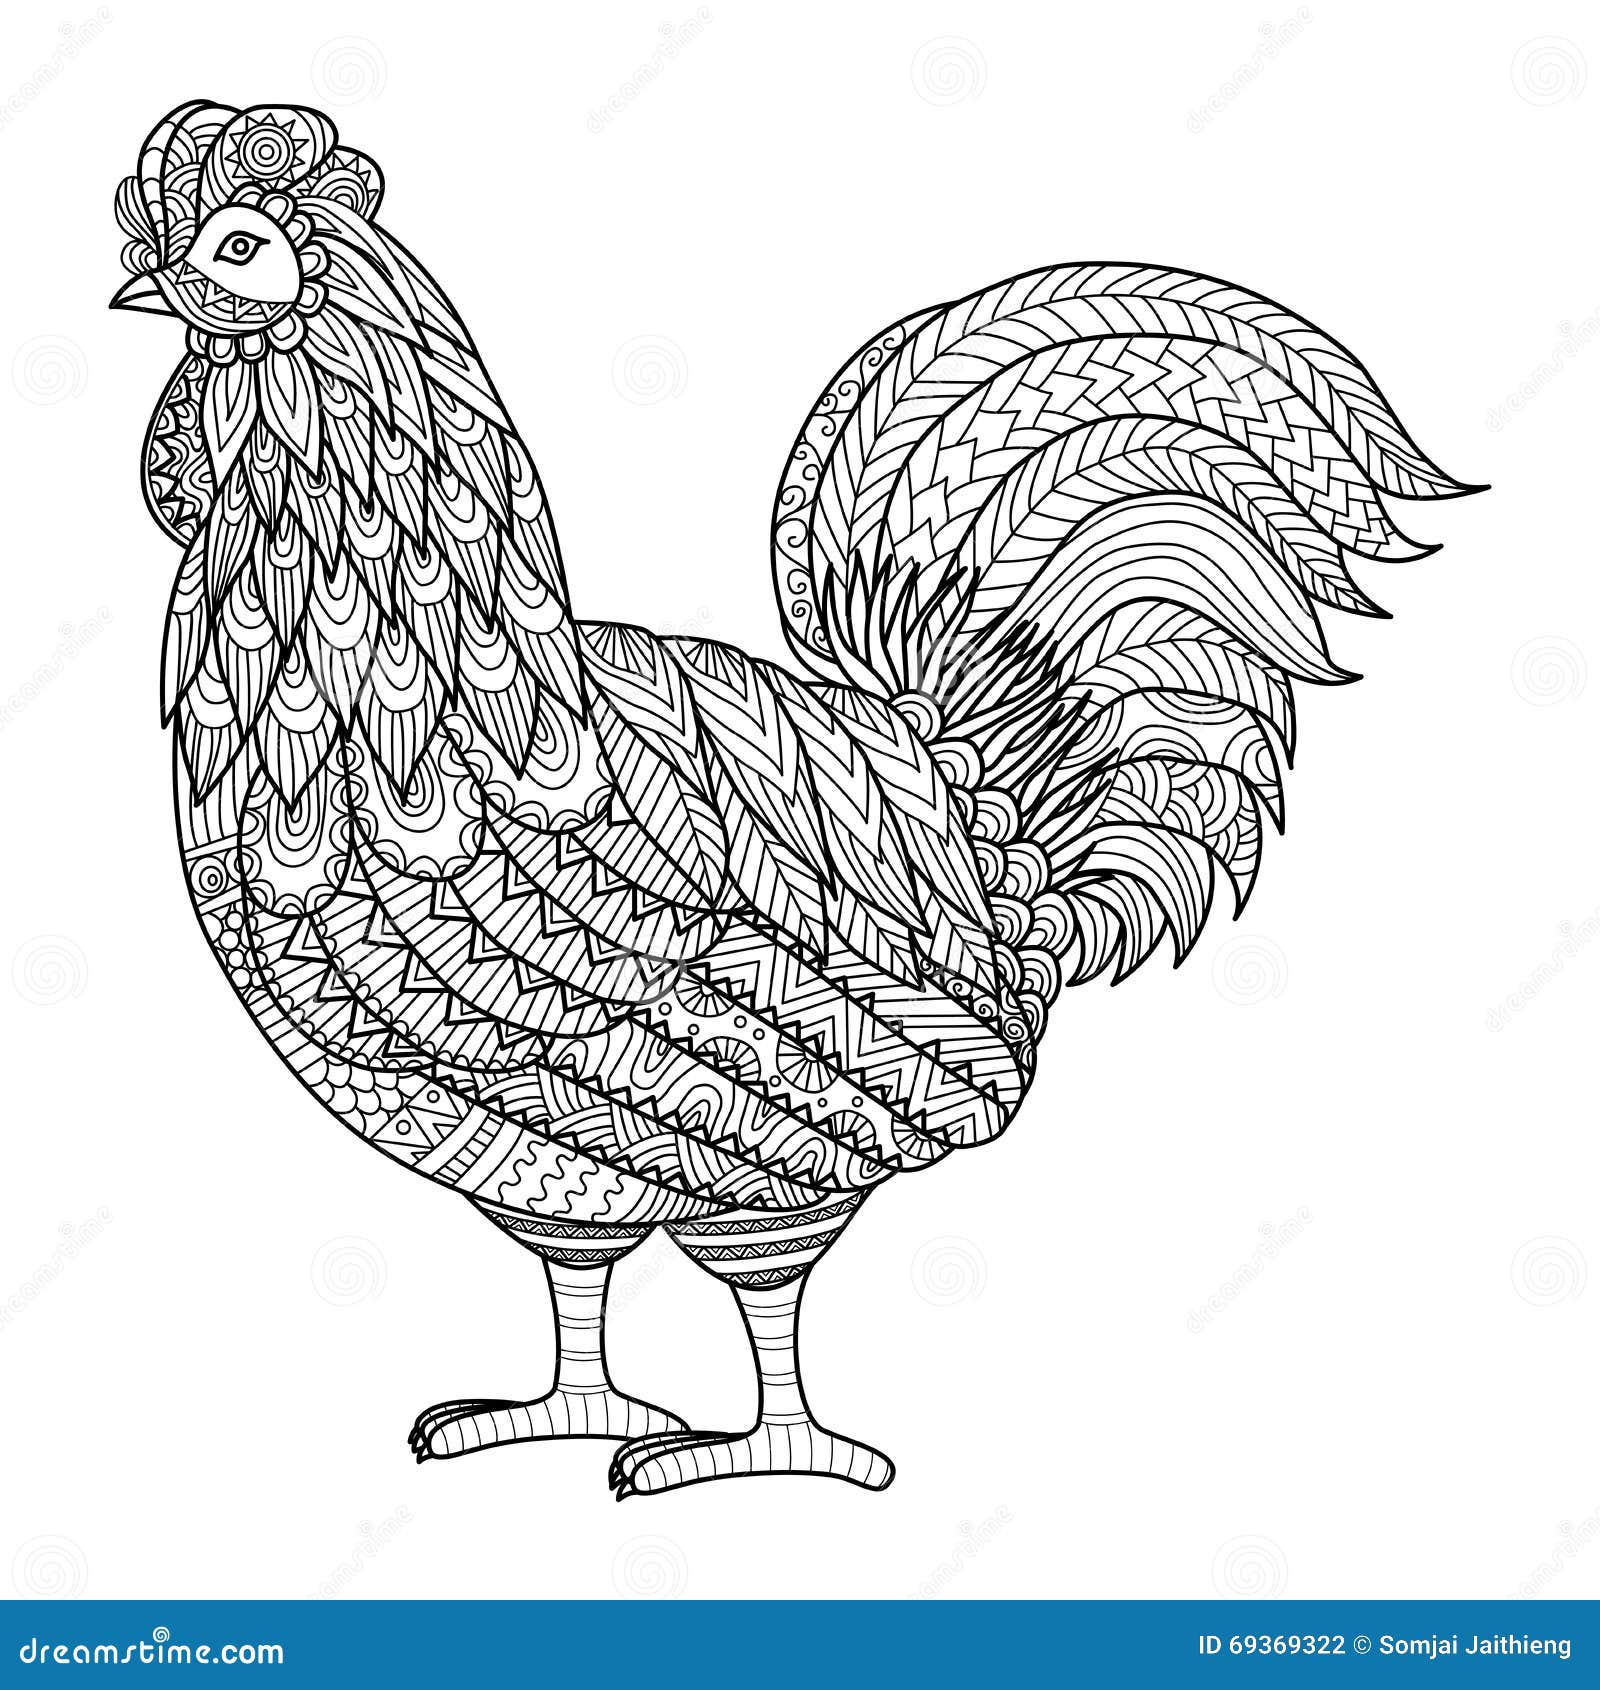 Coloring book pages chicken stock illustrations â coloring book pages chicken stock illustrations vectors clipart